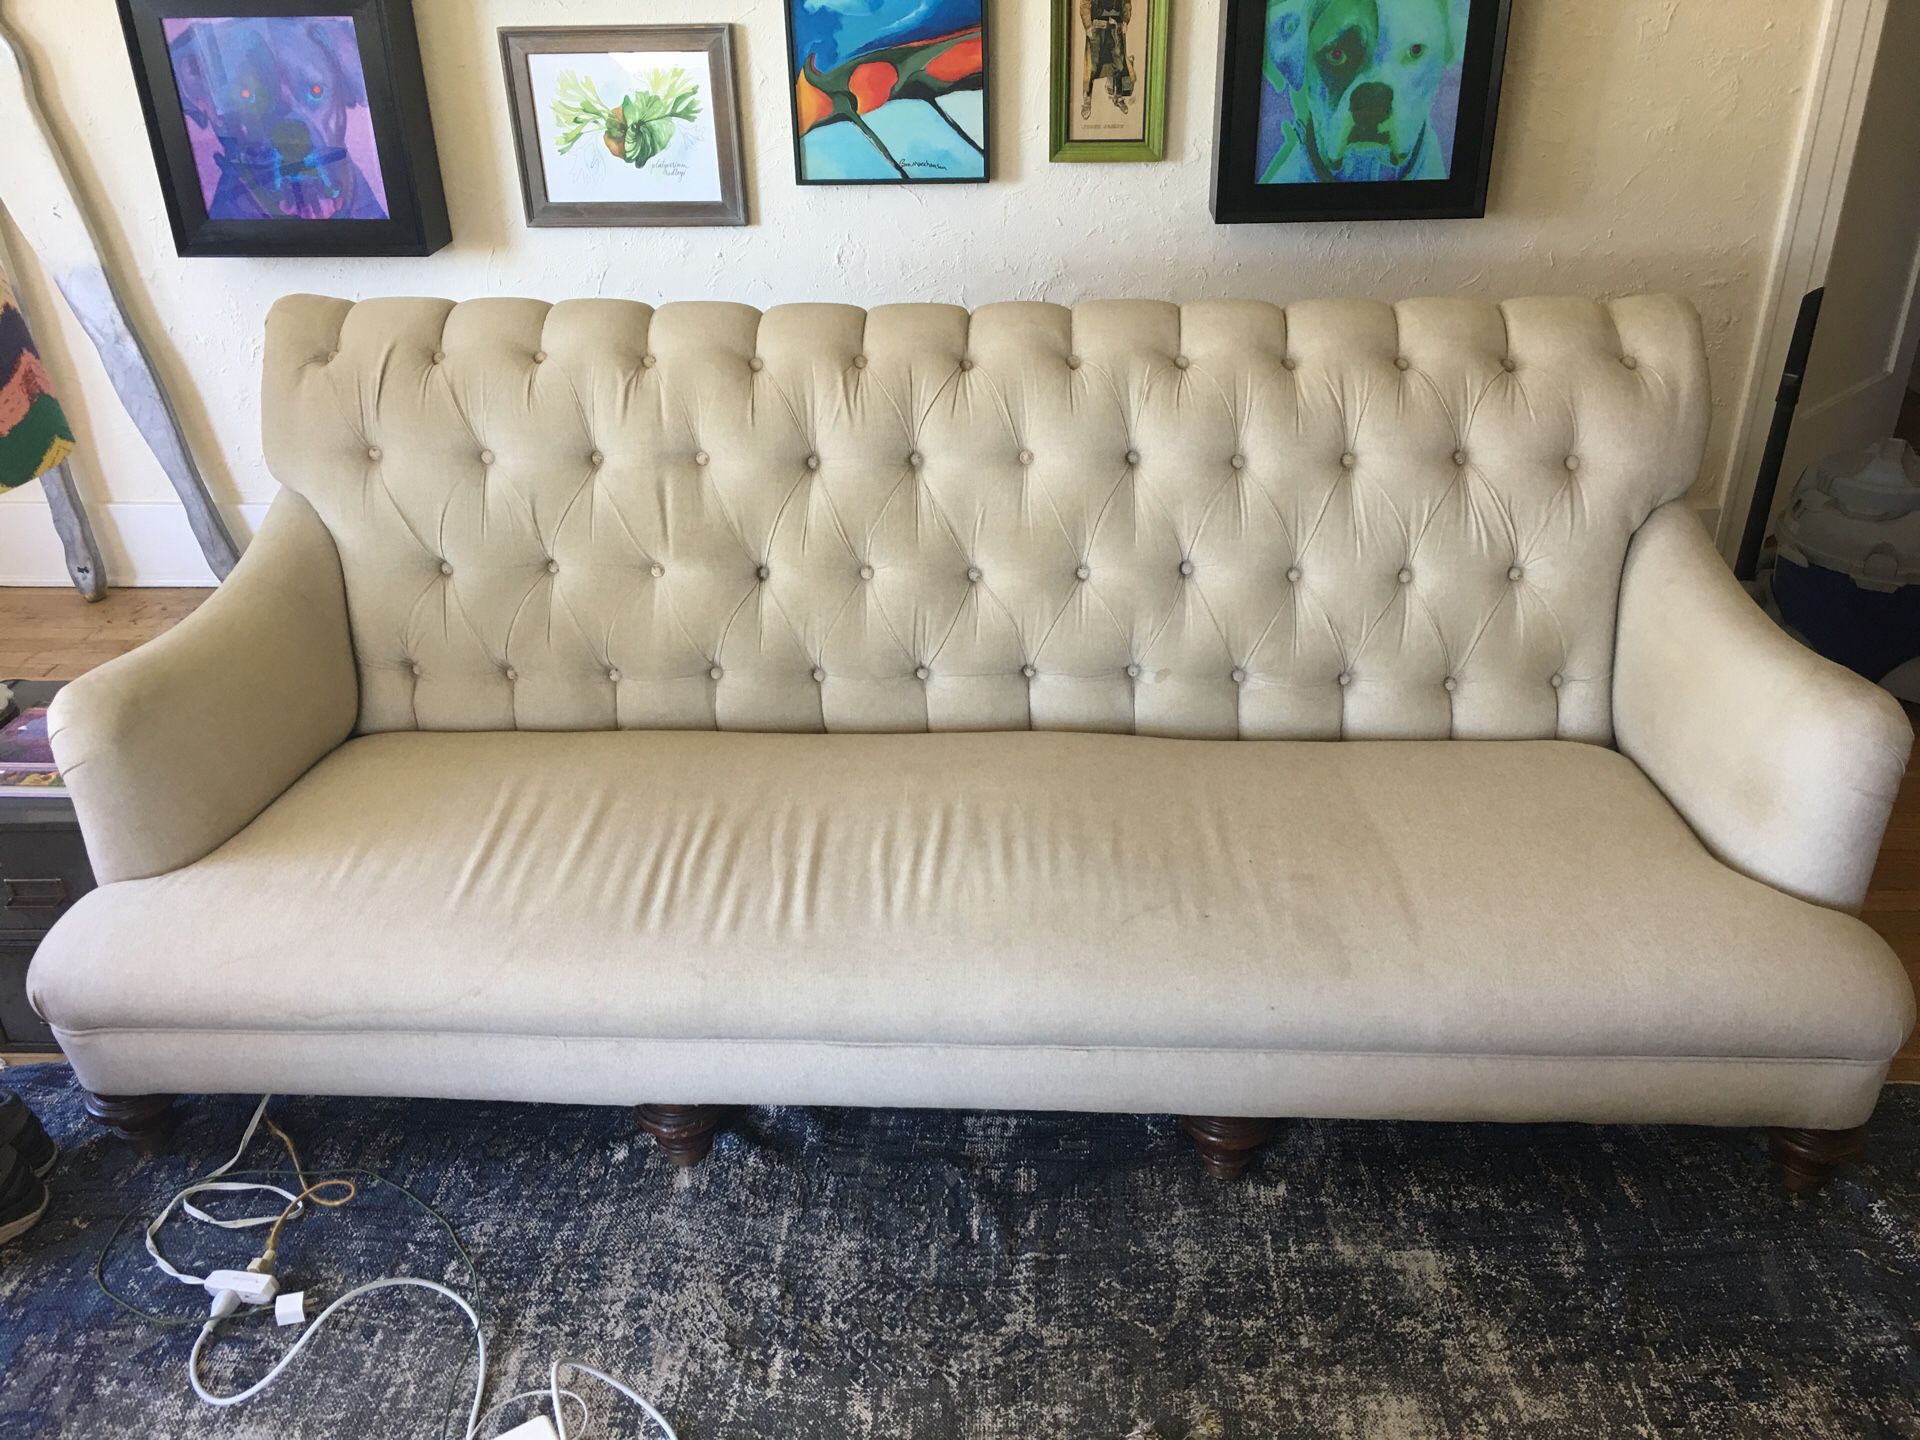 Vintage library couch